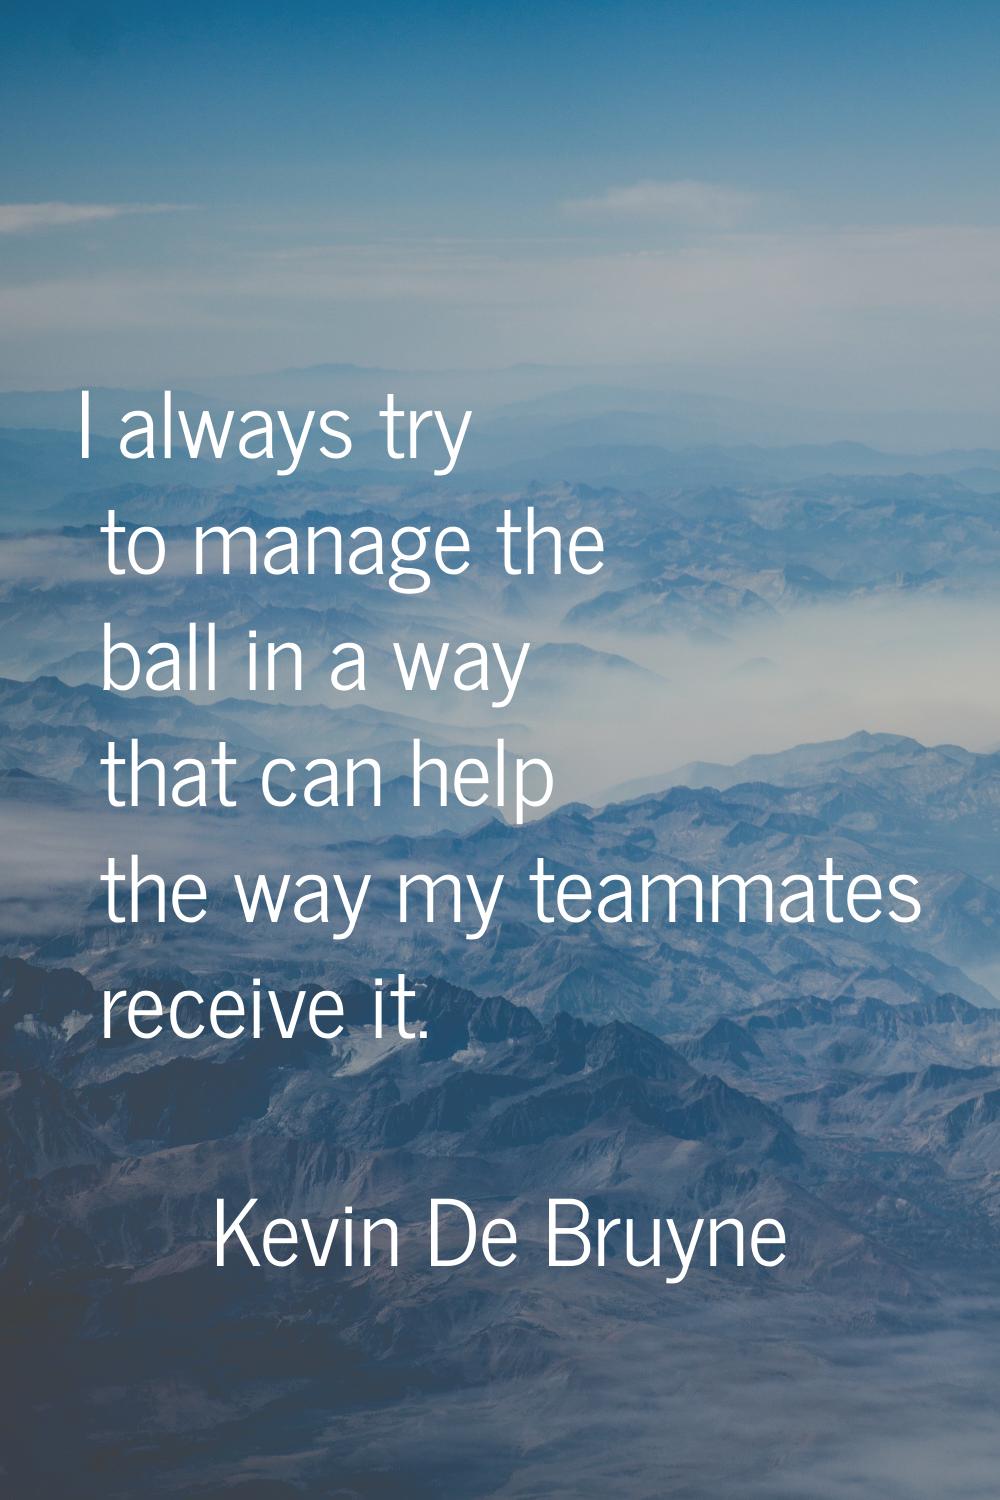 I always try to manage the ball in a way that can help the way my teammates receive it.